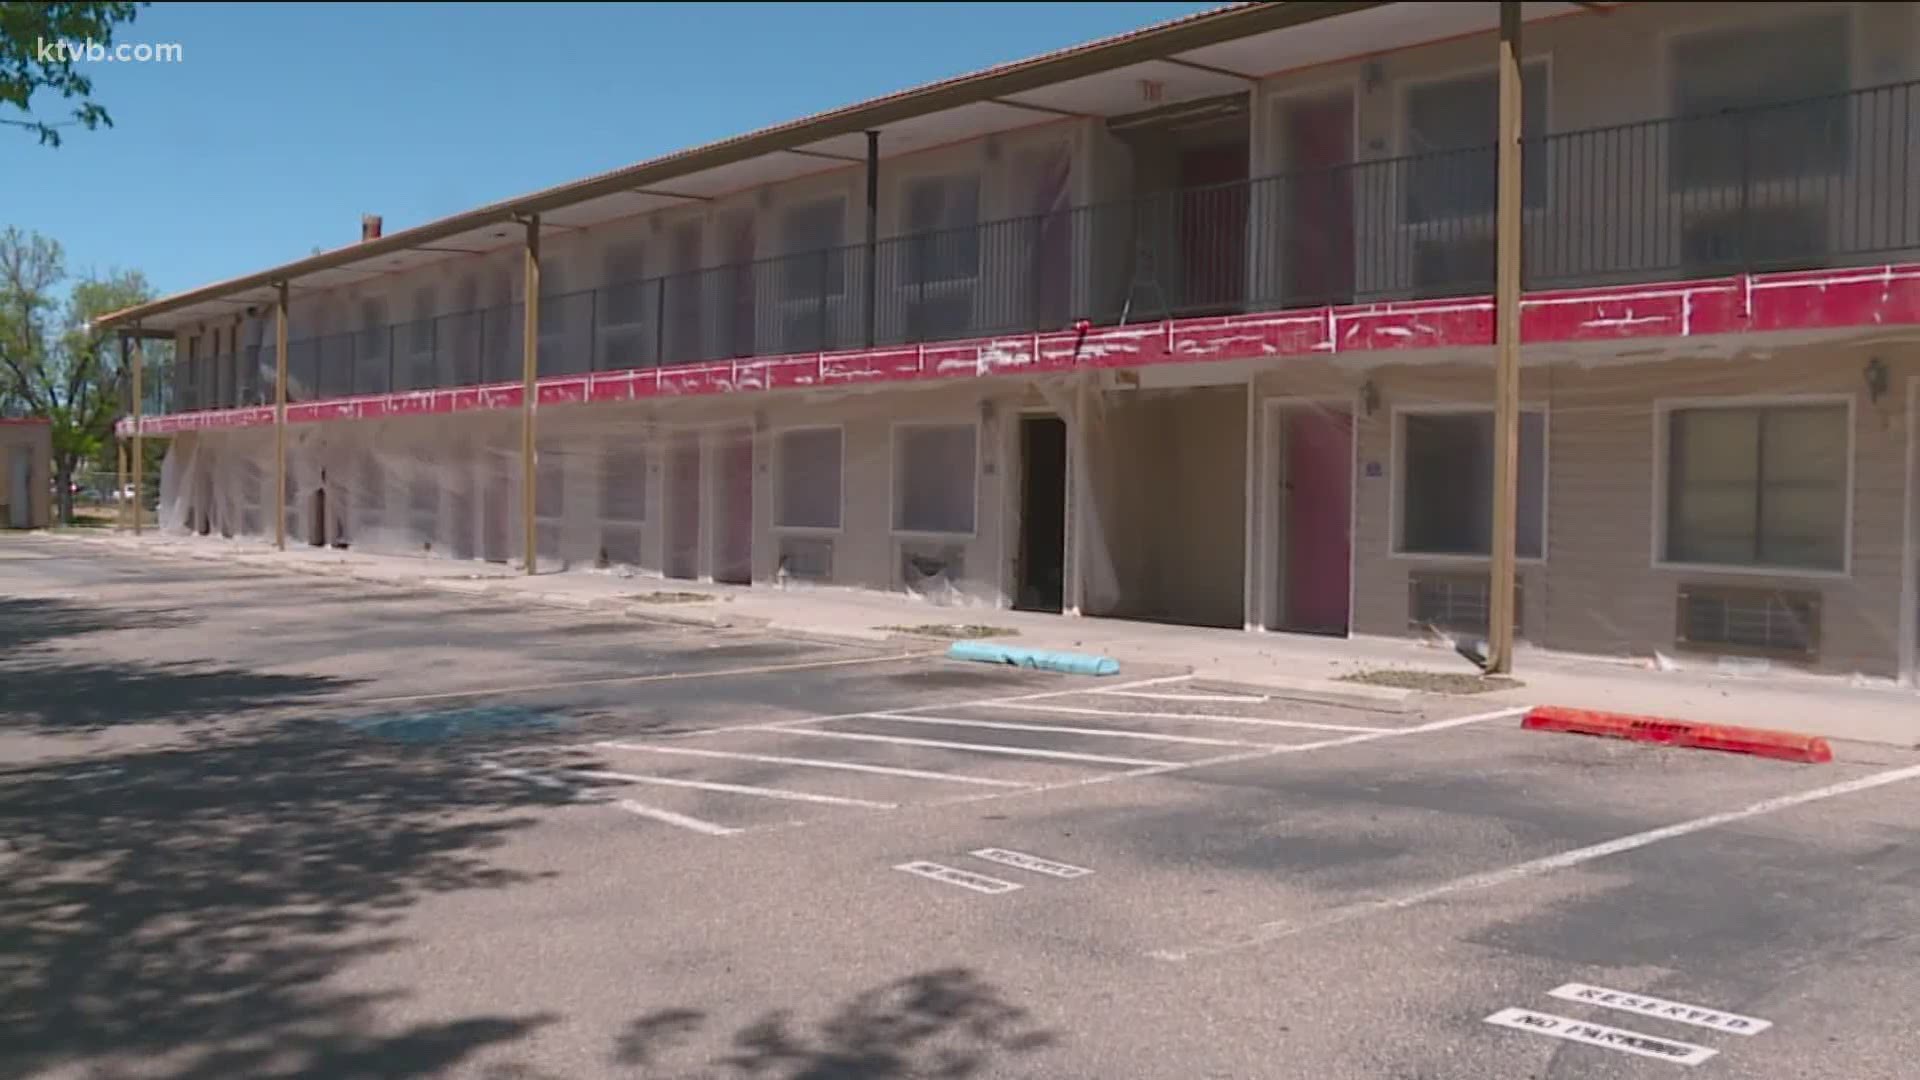 Fortified Holdings plans on giving "new life" to an old motel building with a new reuse-focused plan.